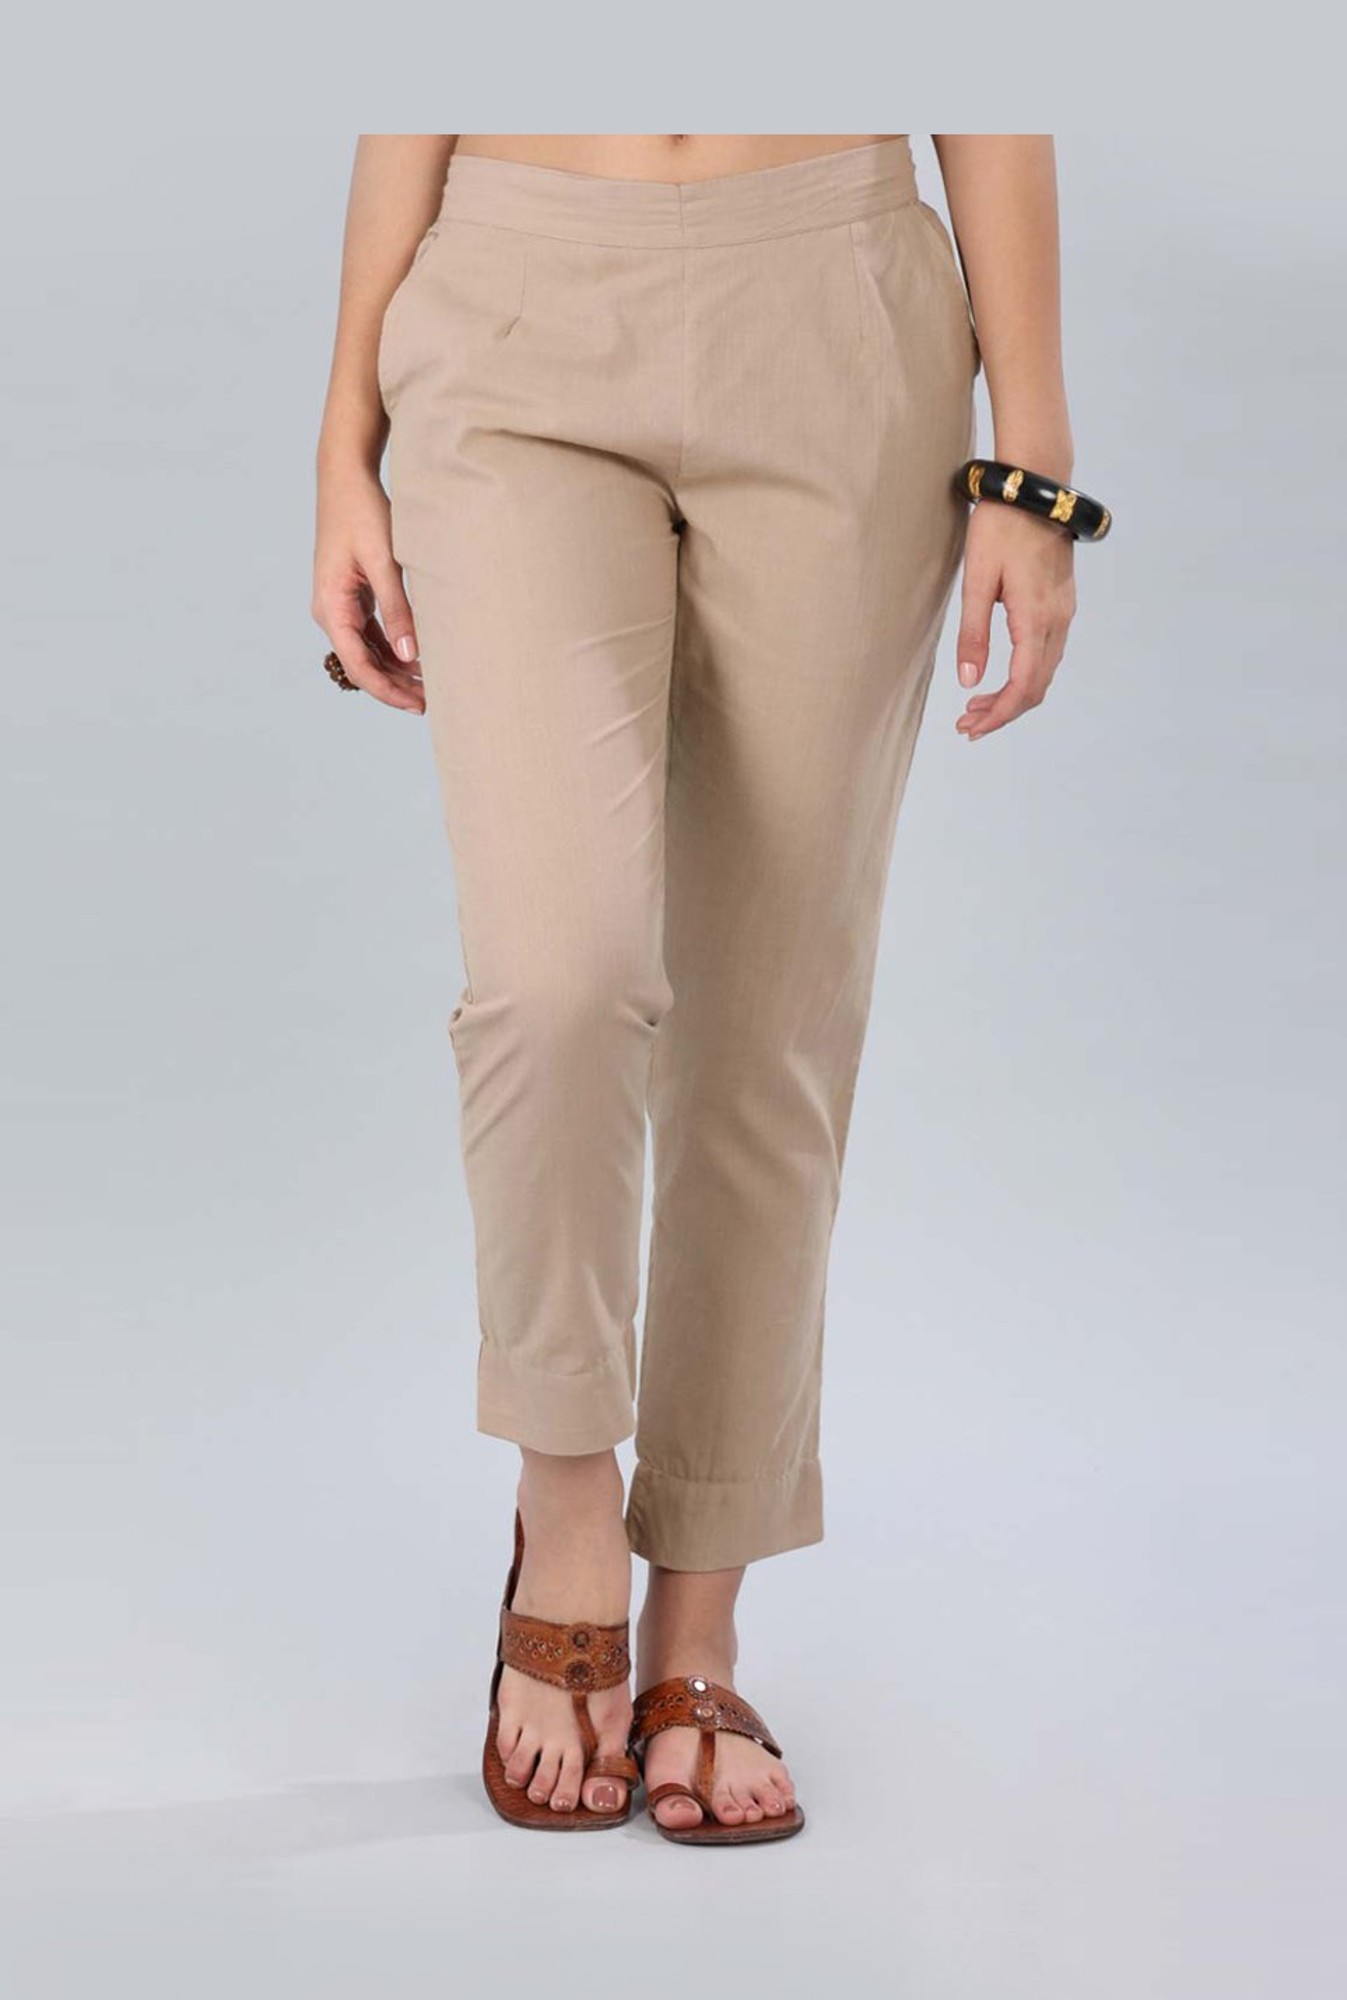 Buy FOREVER NEW Womens Carrie Cigarette Pants  Shoppers Stop